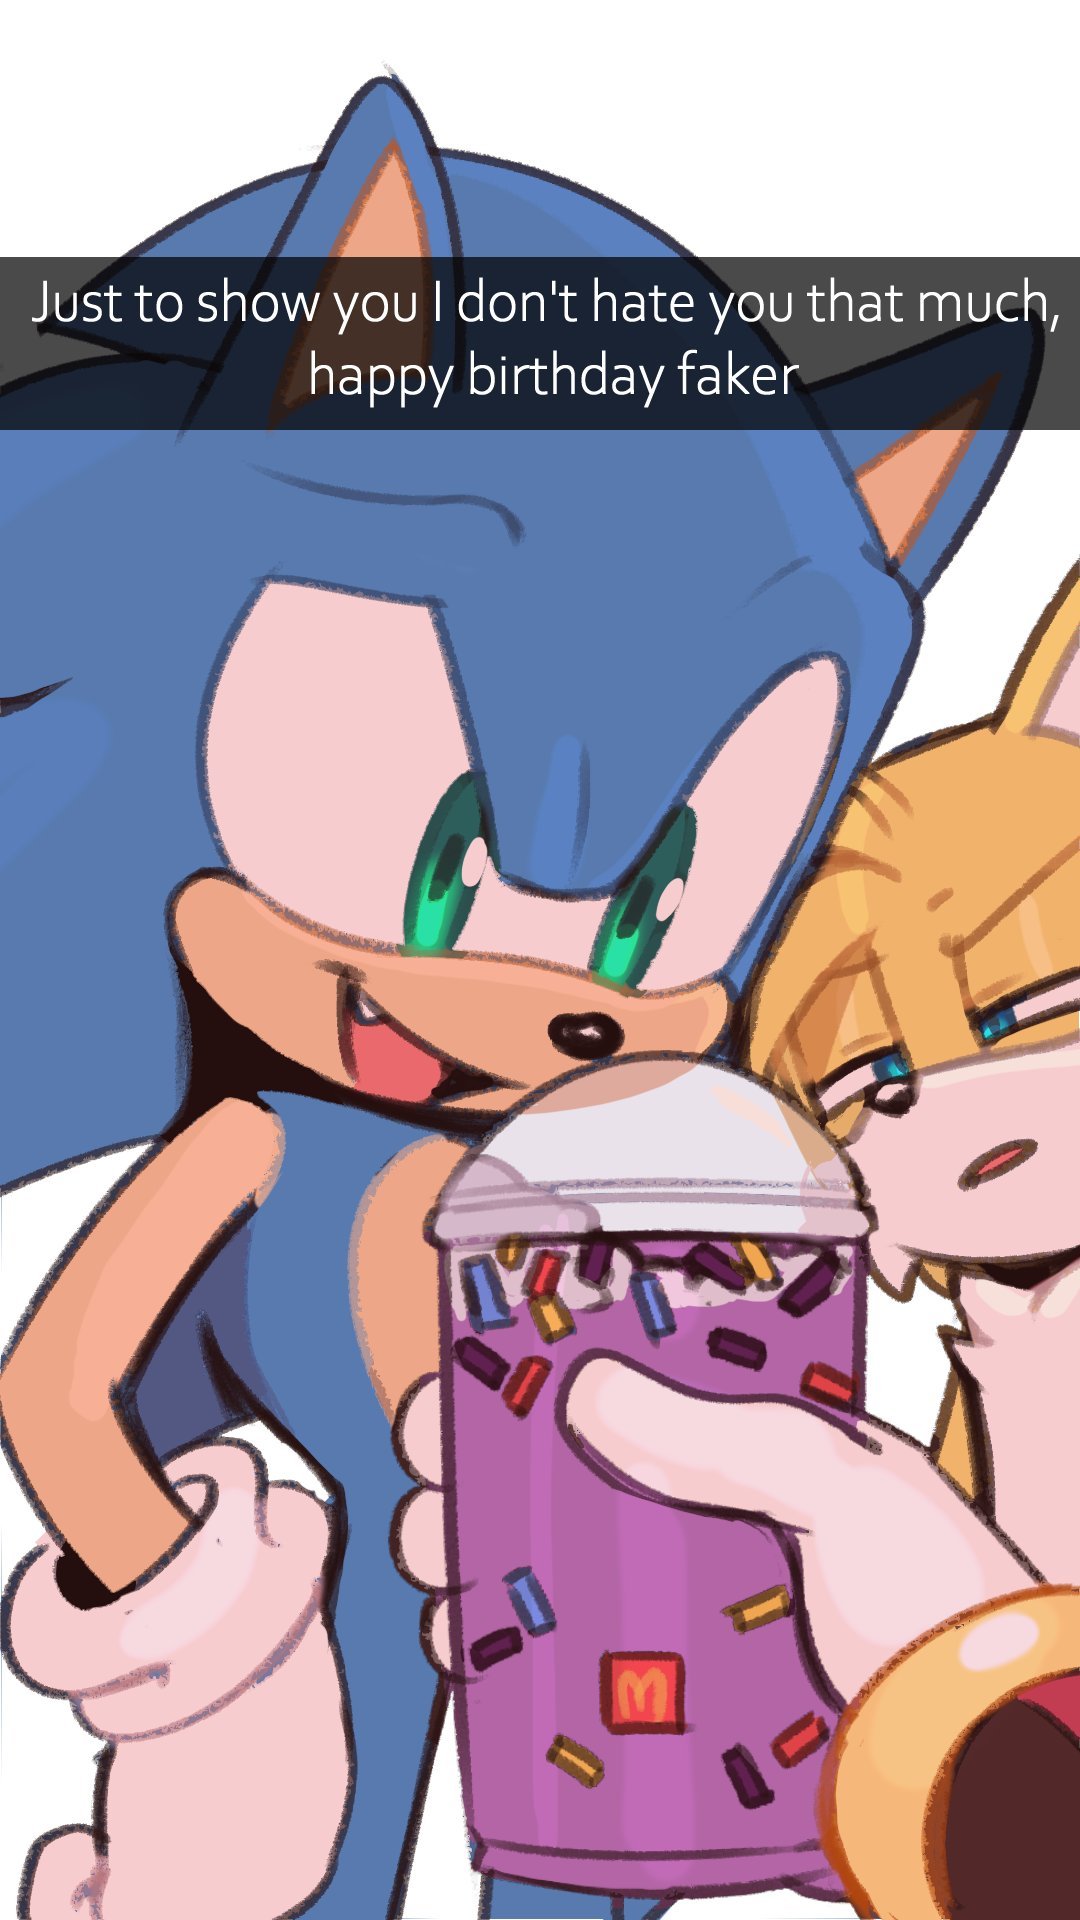 sonic the hedgehog and amy rose (sonic) drawn by toonsite